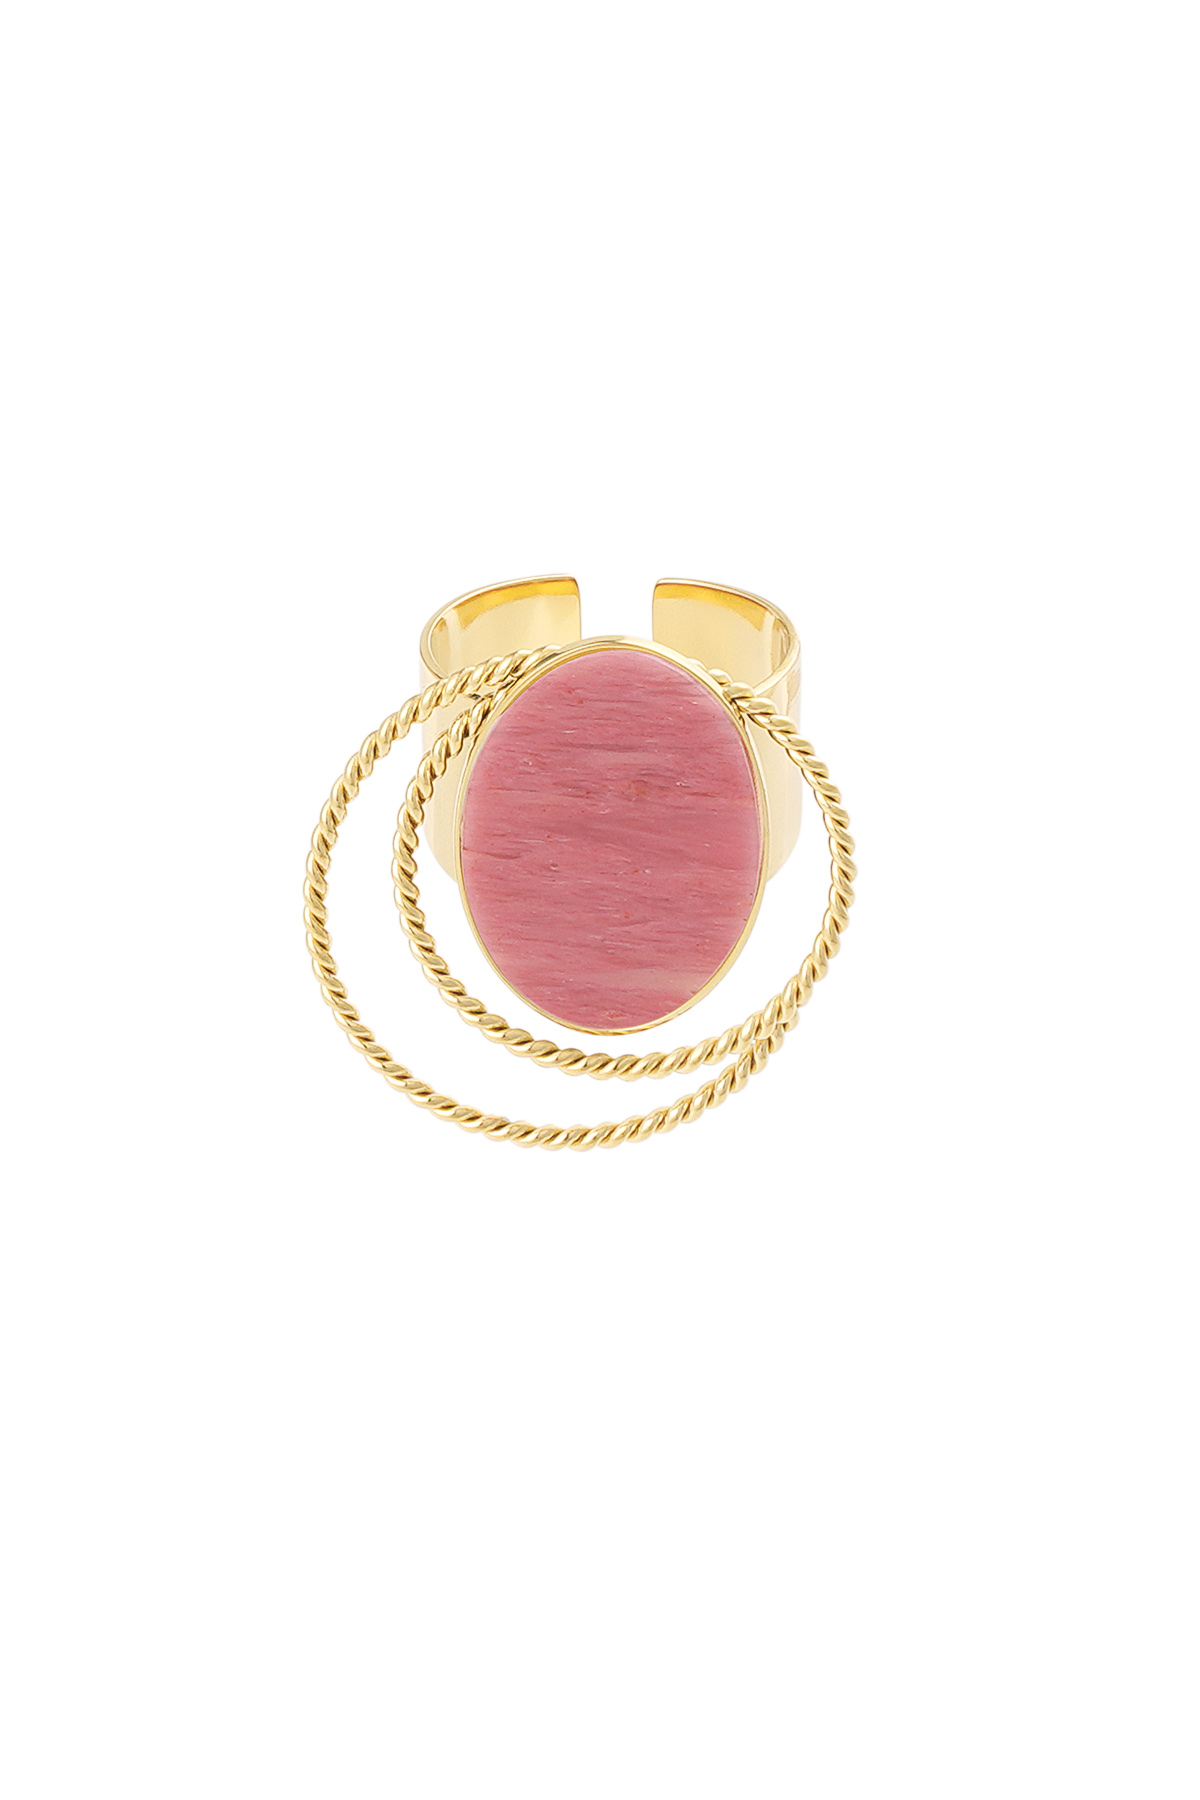 Ring stone with circles - gold/pink